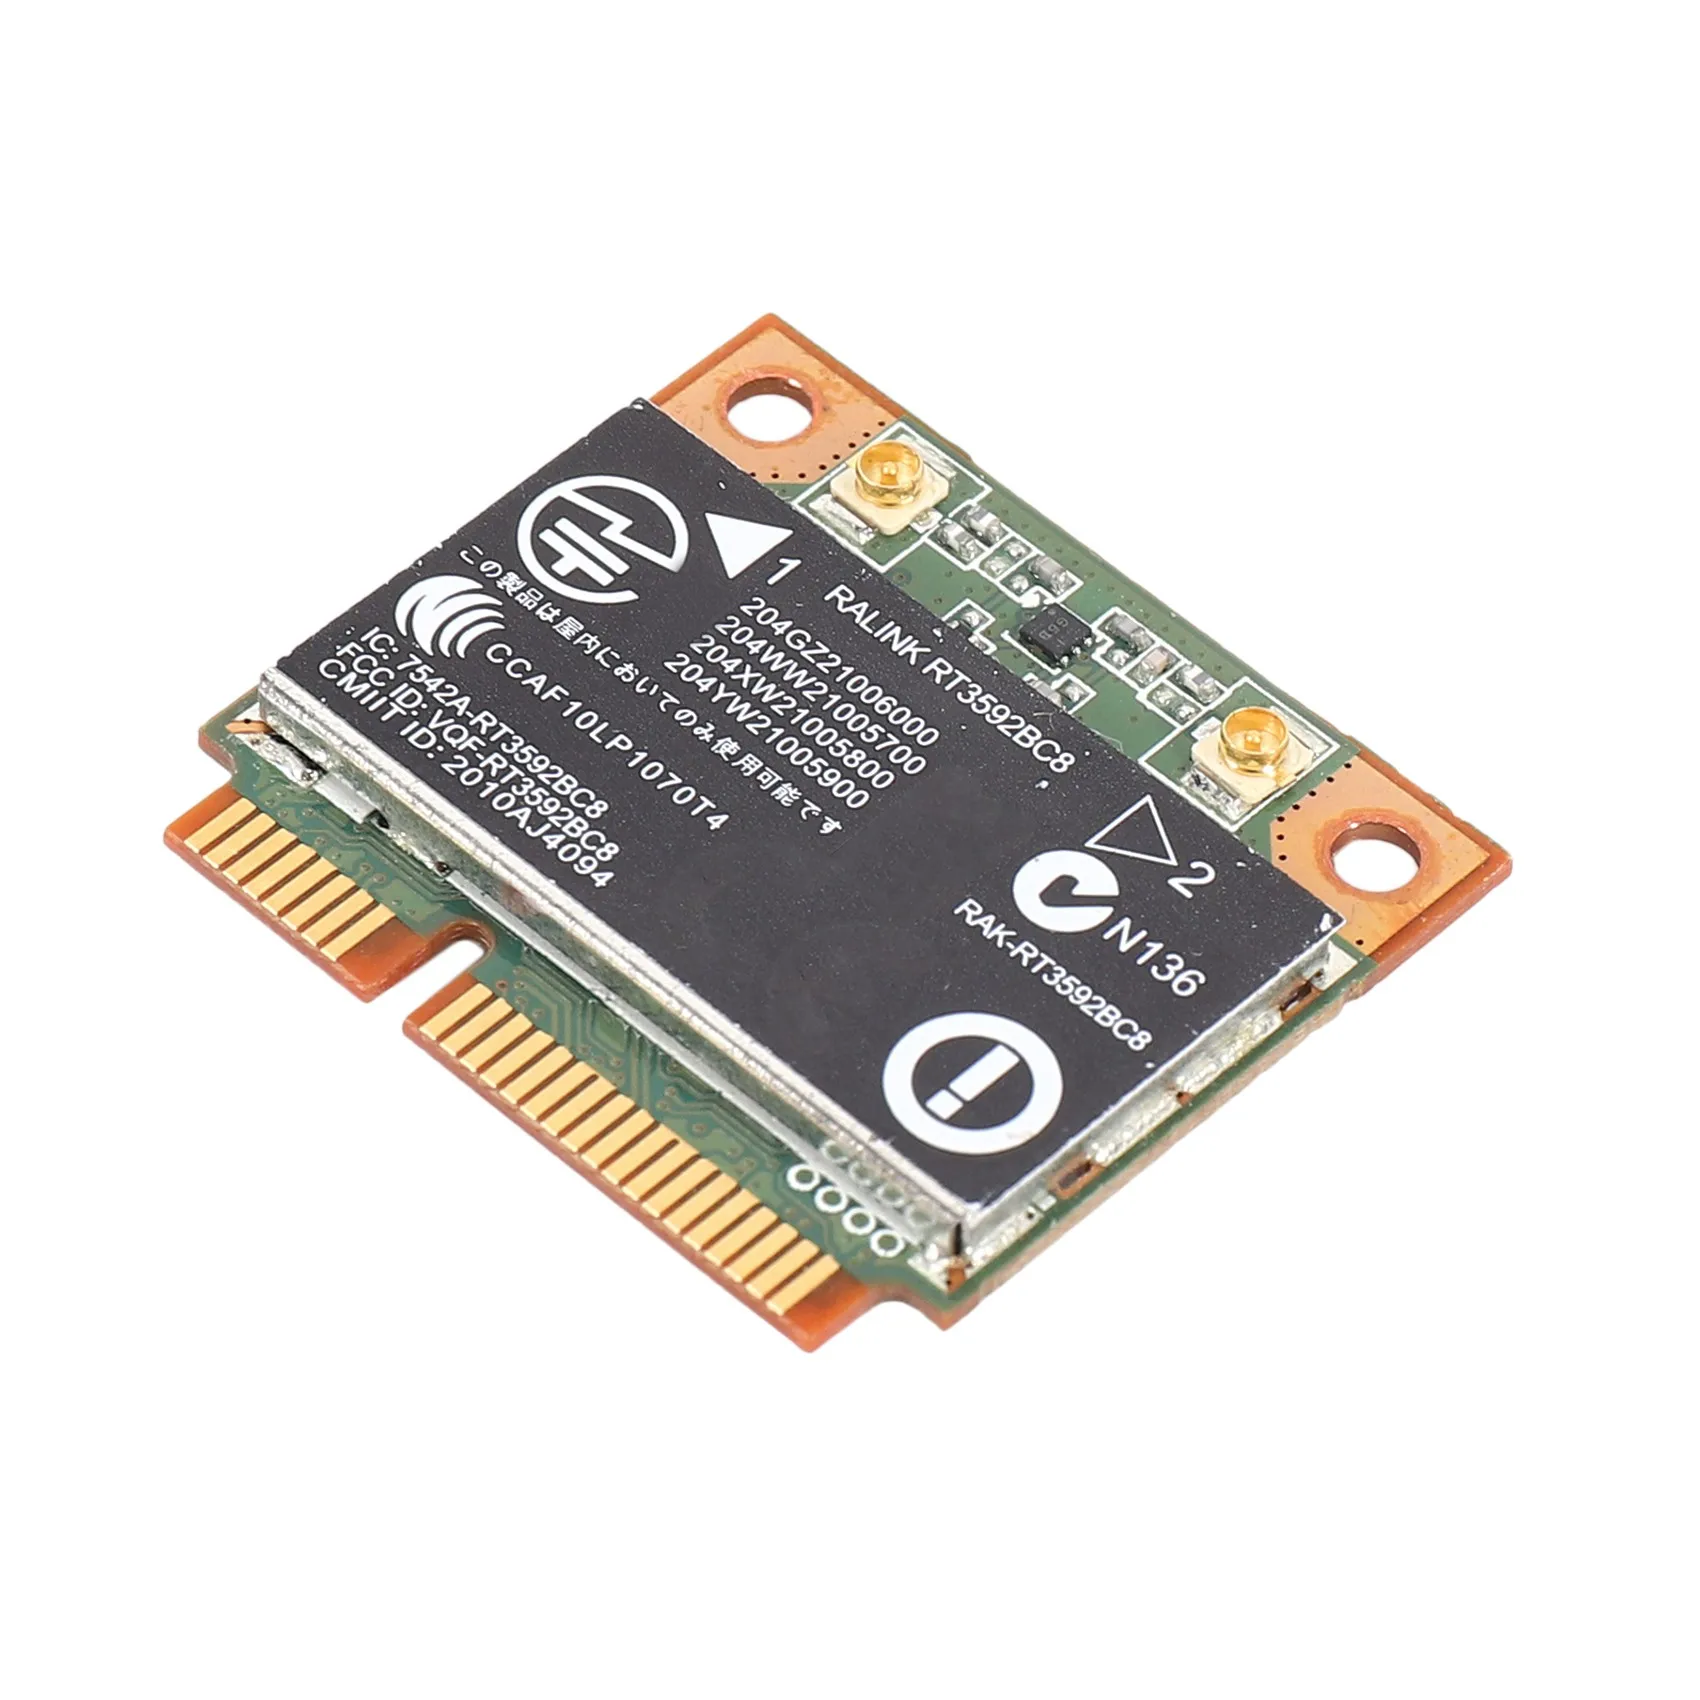 

RT3592BC8 Dual Band 300M & Bluetooth 3.0 Wireless Card for HP 4530S 4330S 4430S 4230S SPS: 630813-001